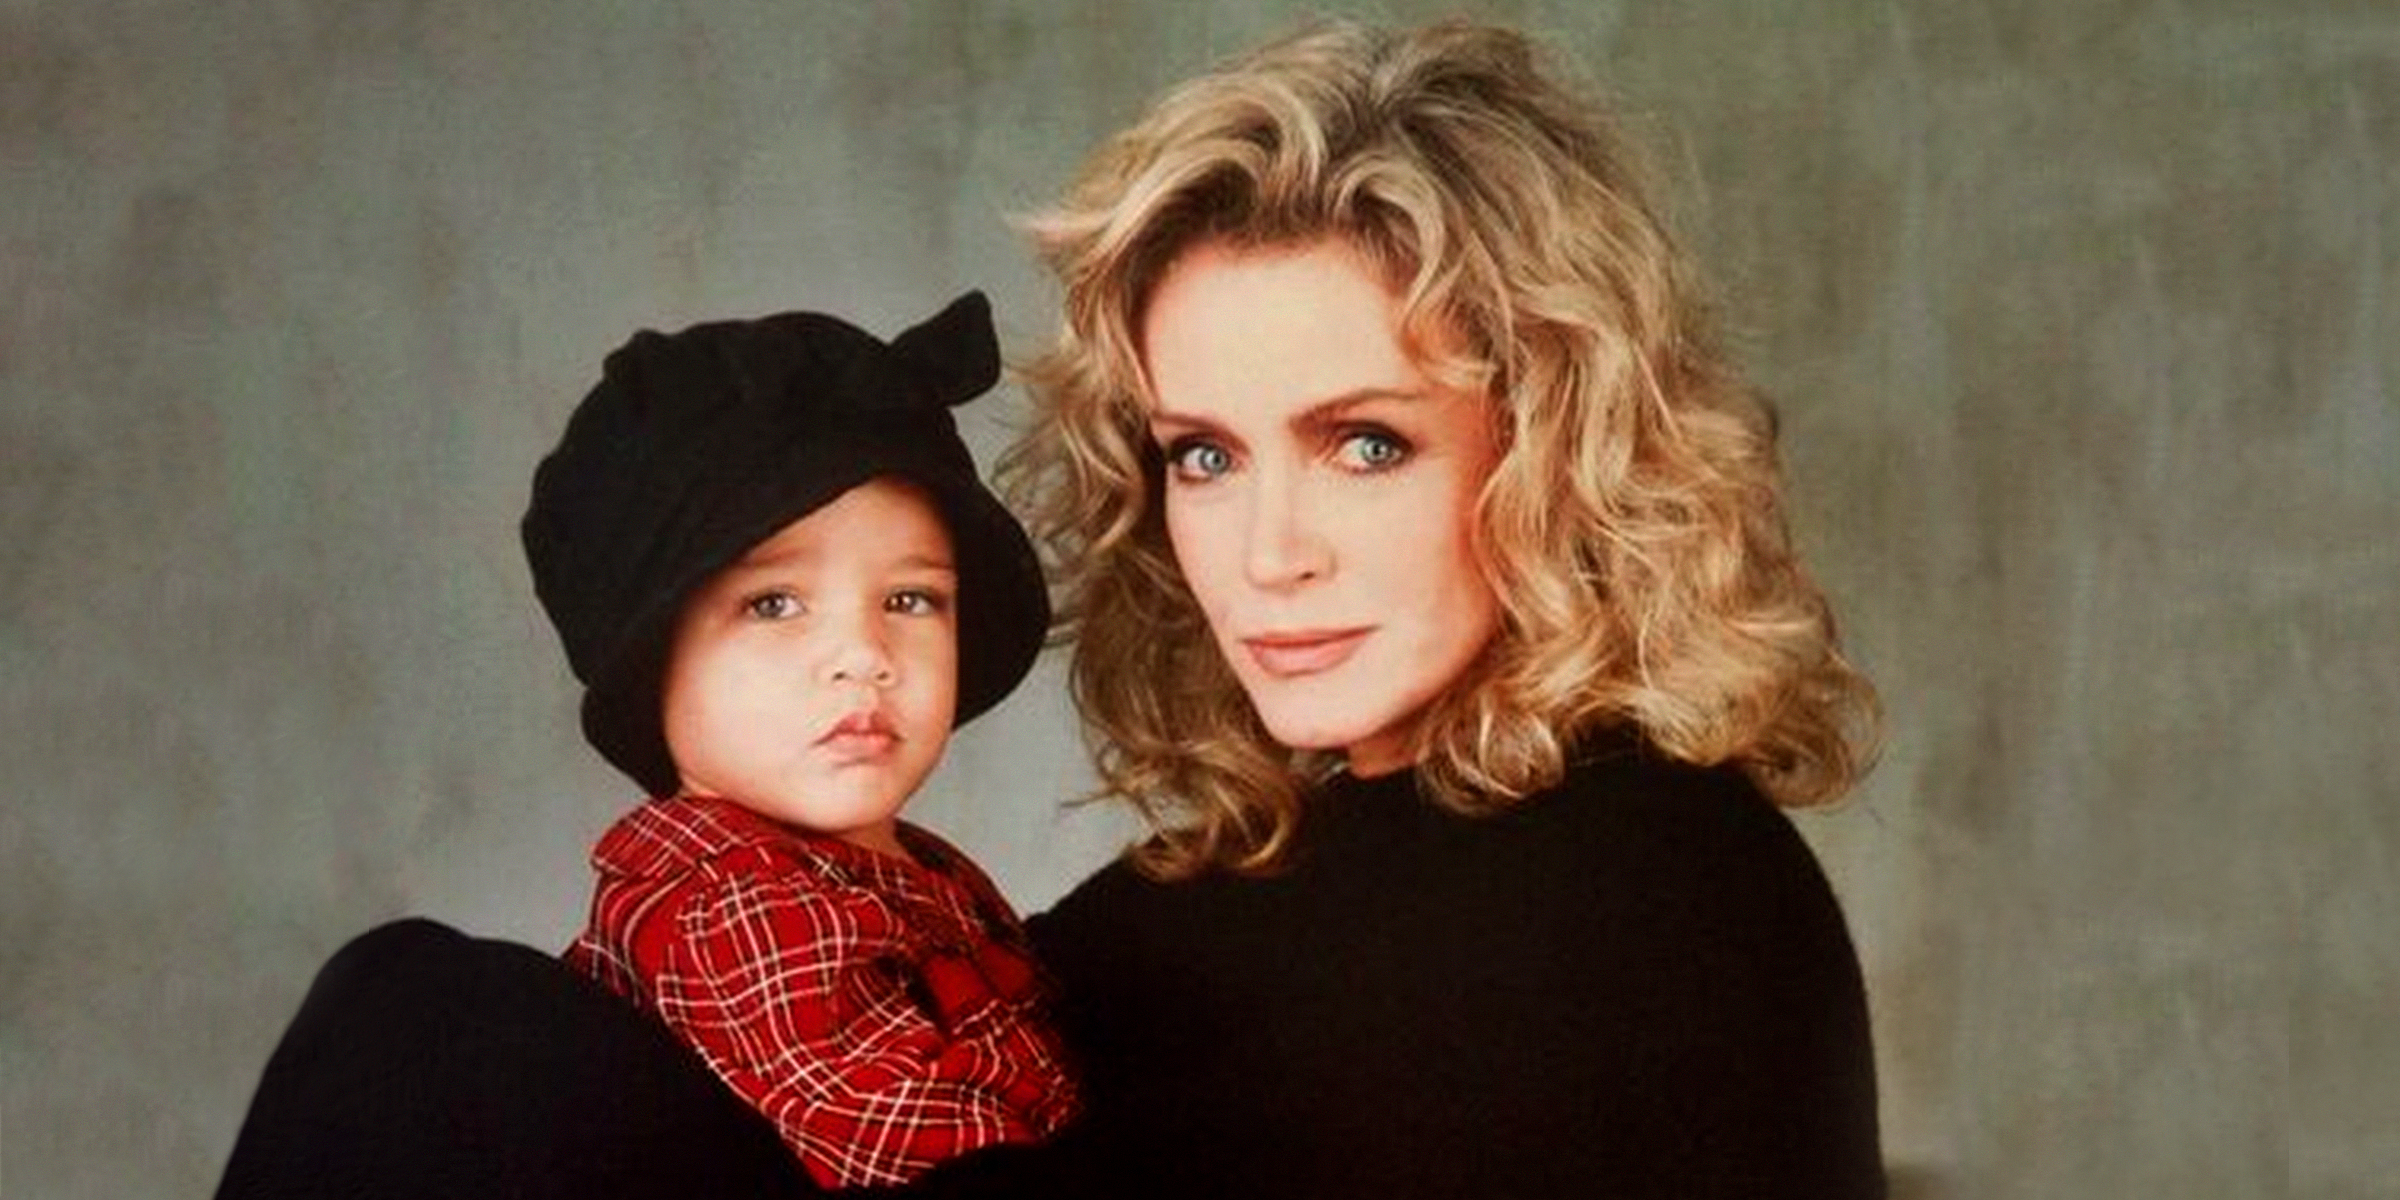 Chloe Mills and Donna Mills, 2014 | Source: Twitter.com/TheDonnaMills